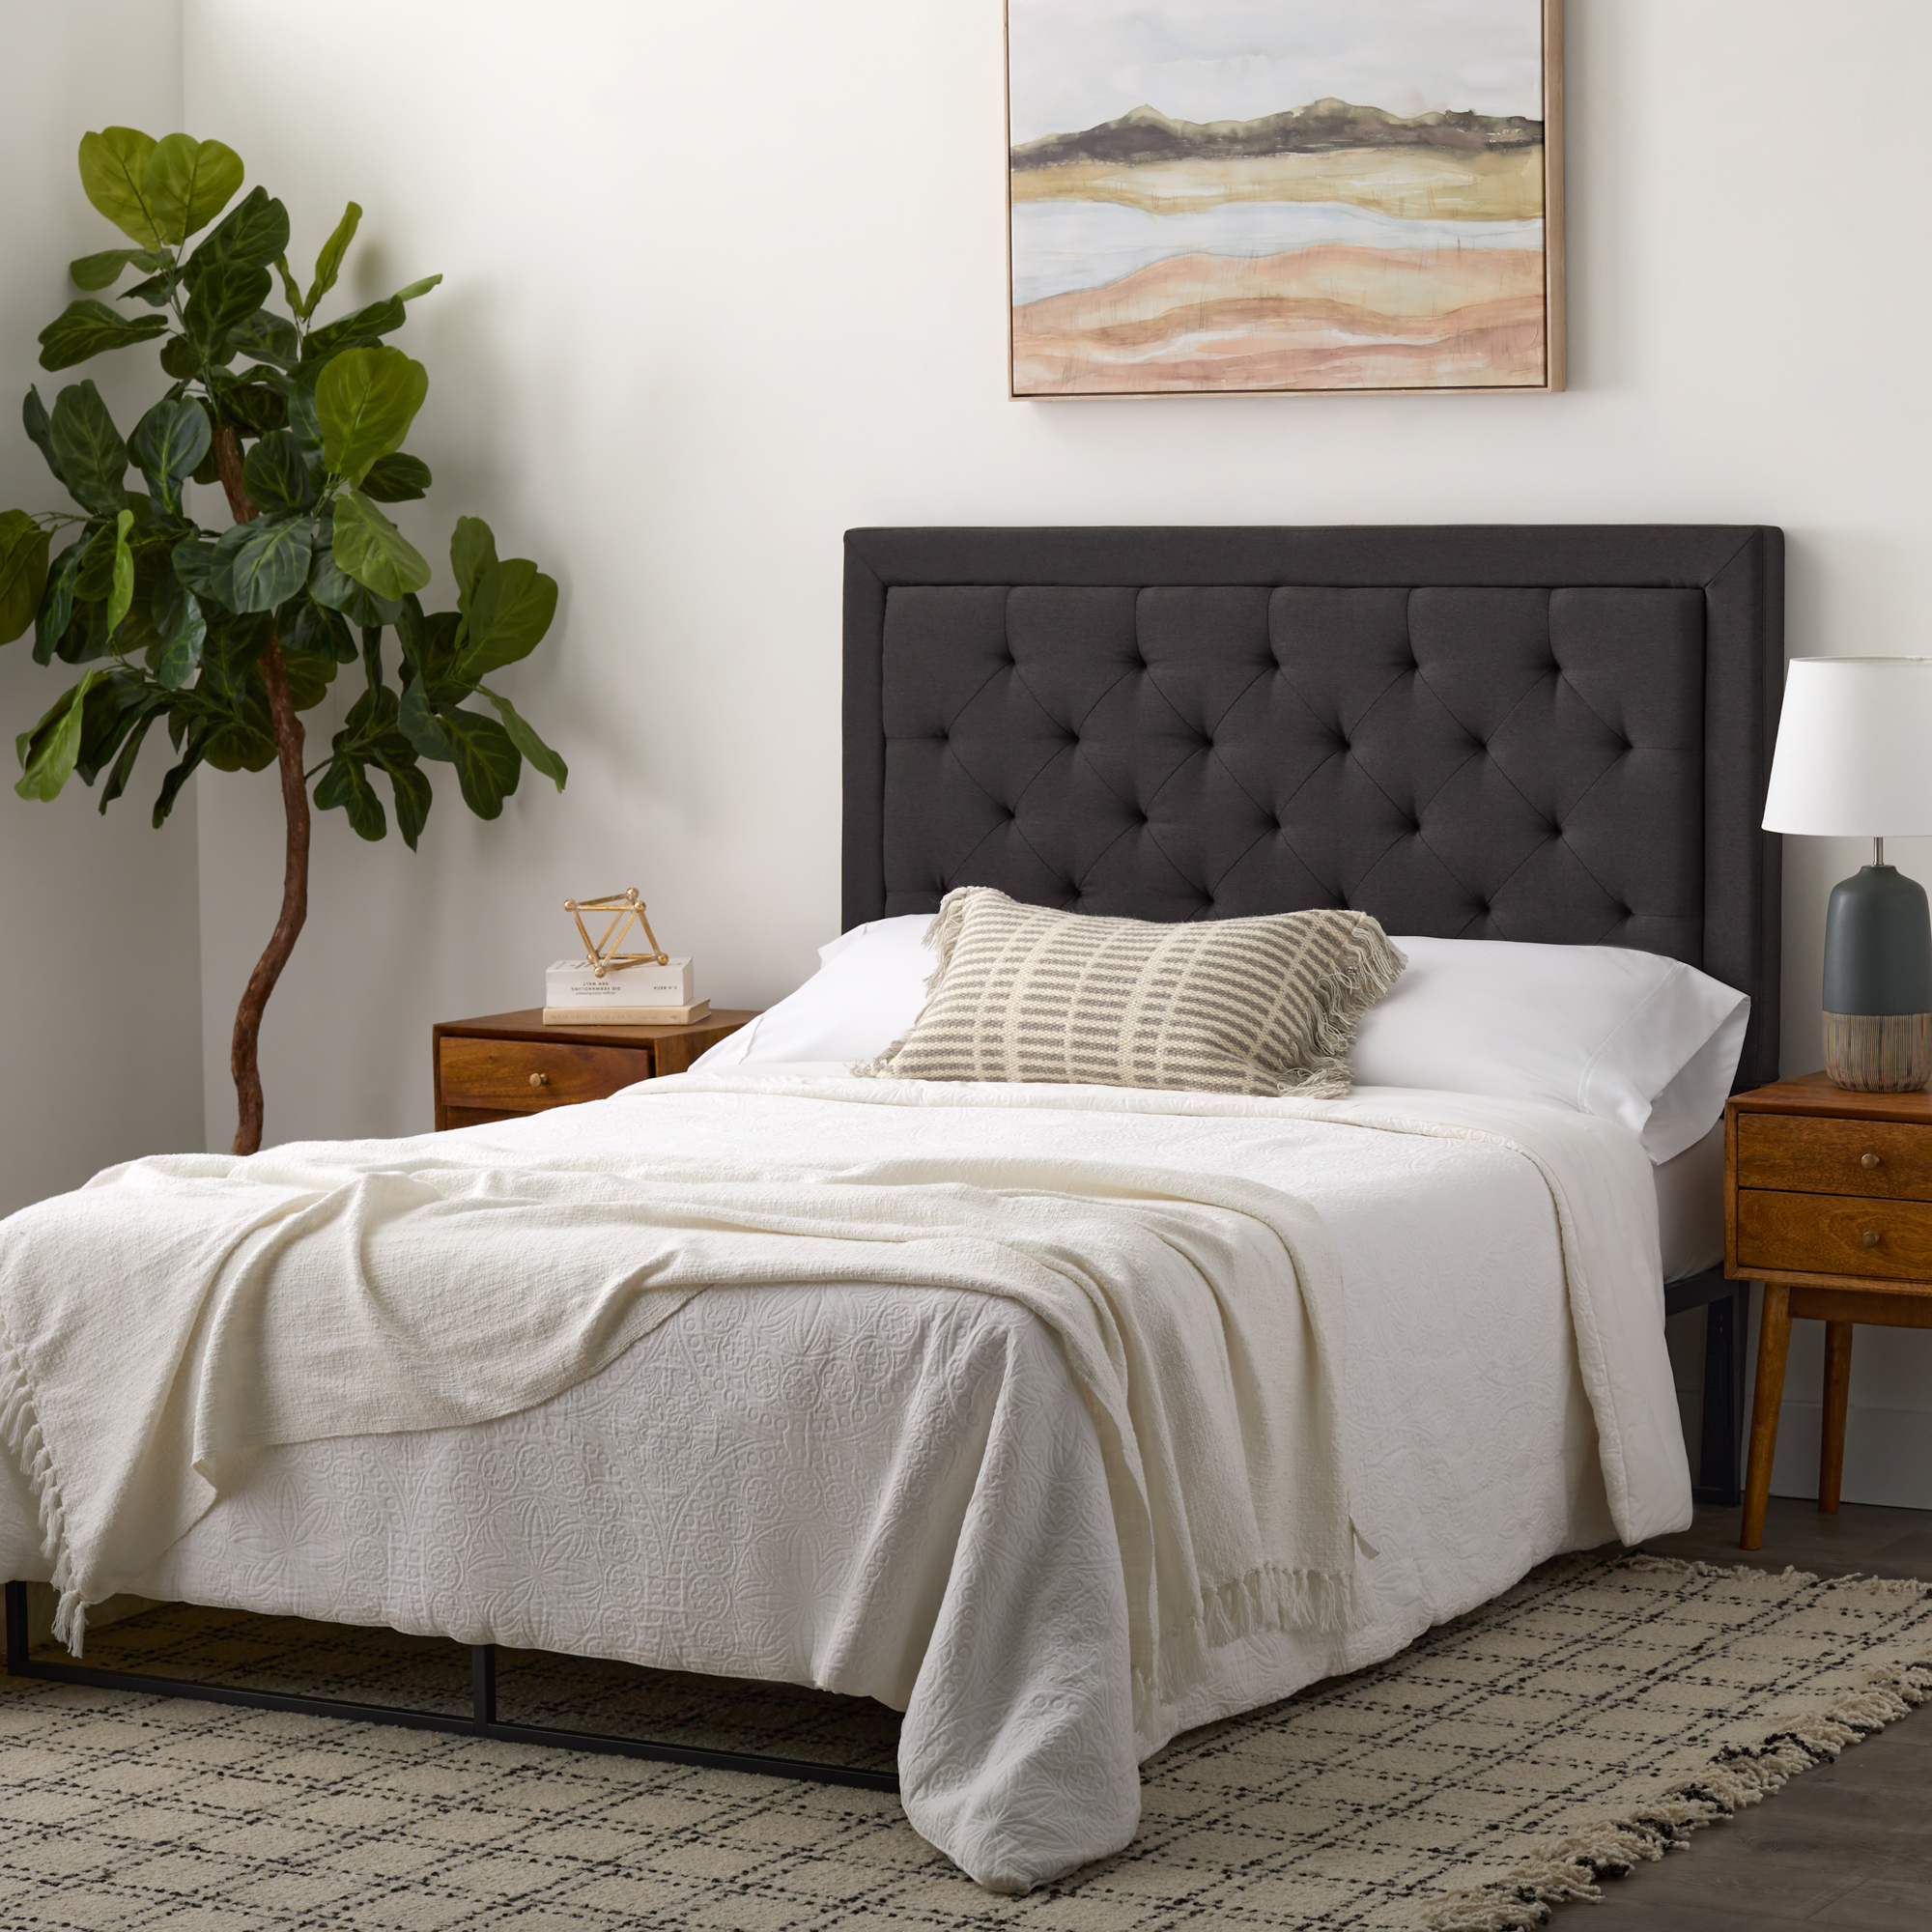 Rest Haven Medford Rectangle Upholstered Headboard with Diamond Tufting, Queen, Charcoal - image 3 of 11